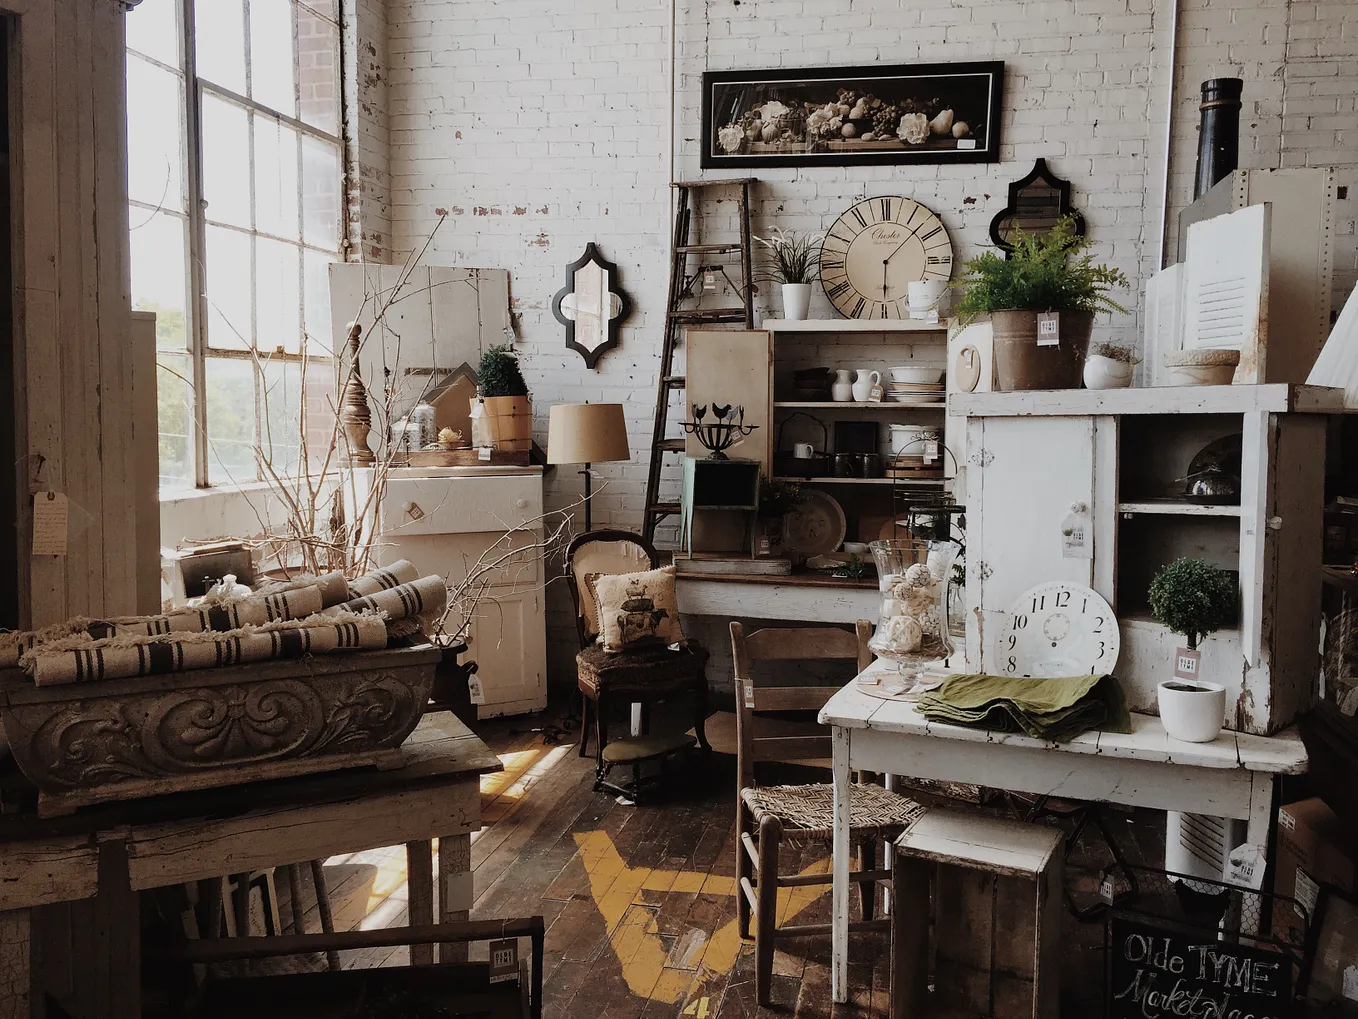 Creating Timeless Memories: Exploring Vintage & Antique Stores with Family.